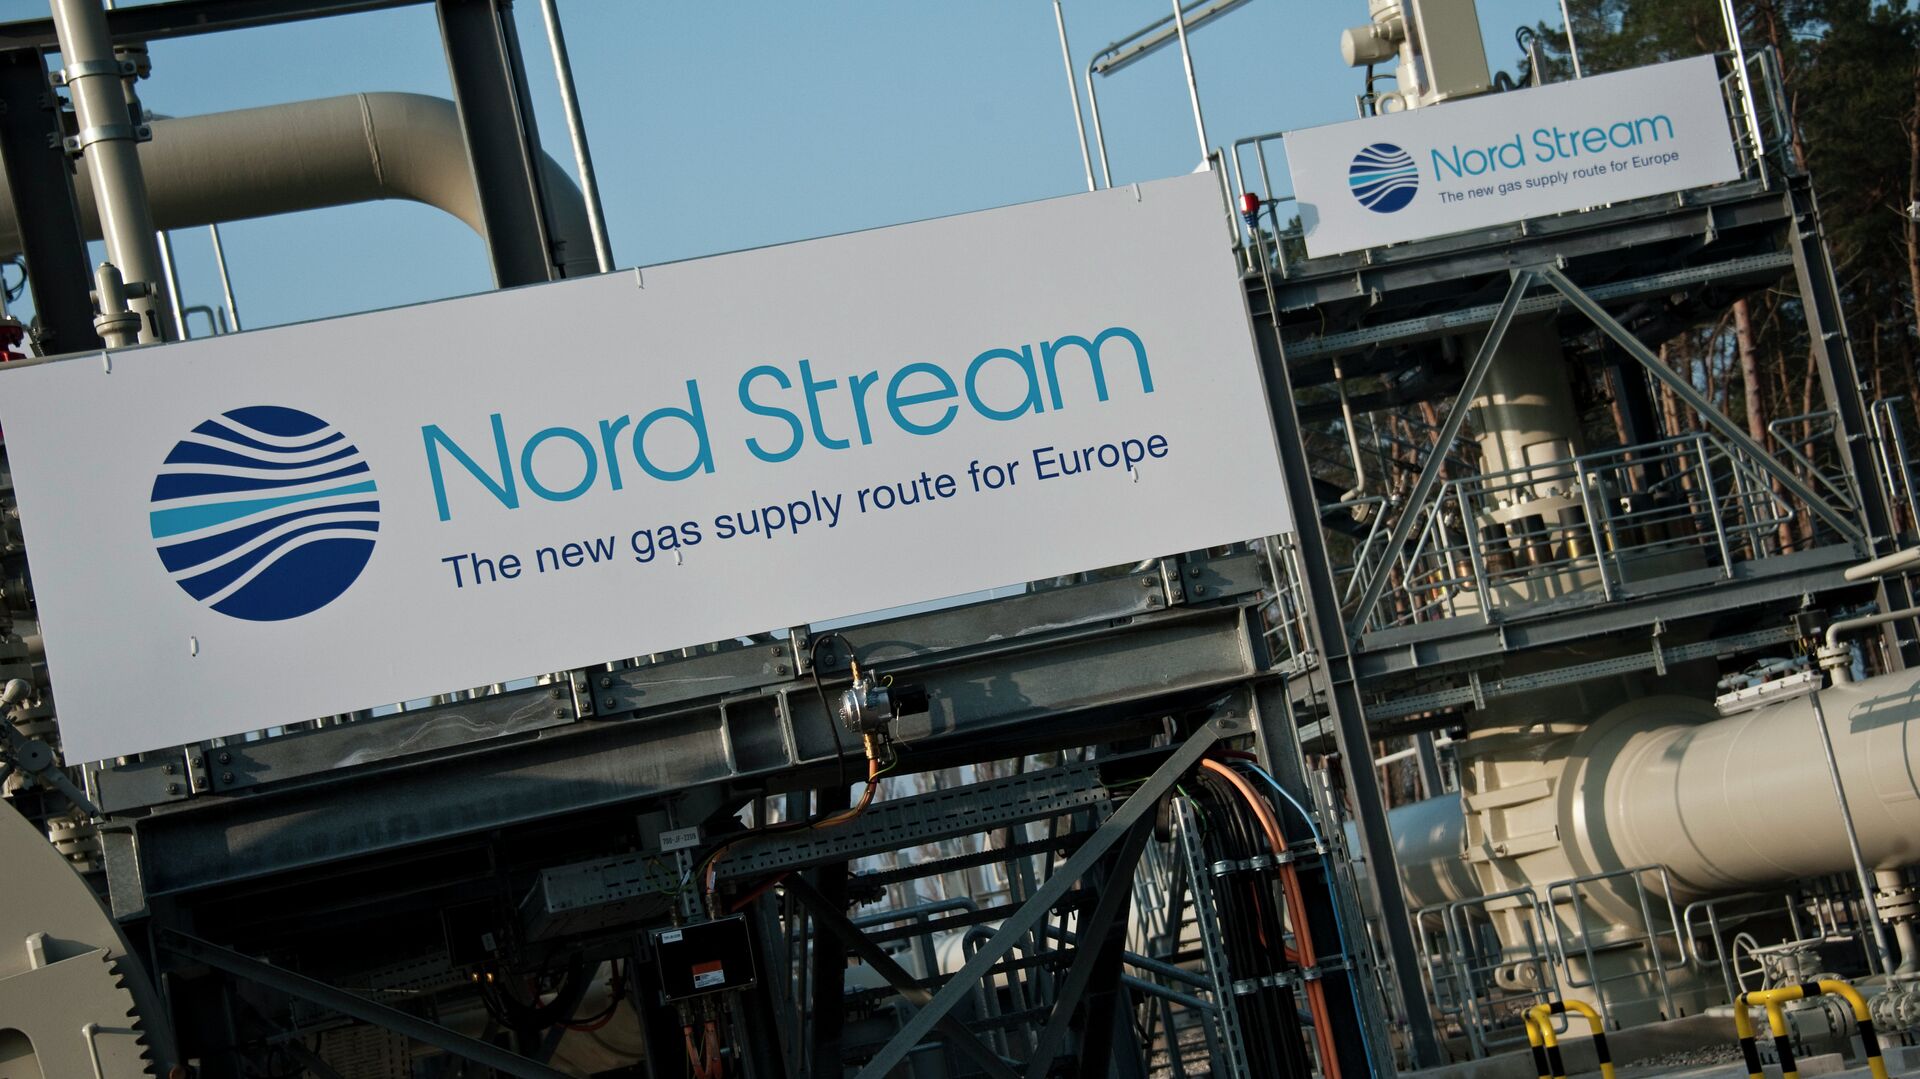 View of the Nordstream gas pipeline terminal prior to an inaugural ceremony for the first of Nord Stream's twin 1,224 kilometre gas pipeline through the Baltic Sea, in Lubmin, Germany, 8 November 2011 - Sputnik International, 1920, 06.09.2021